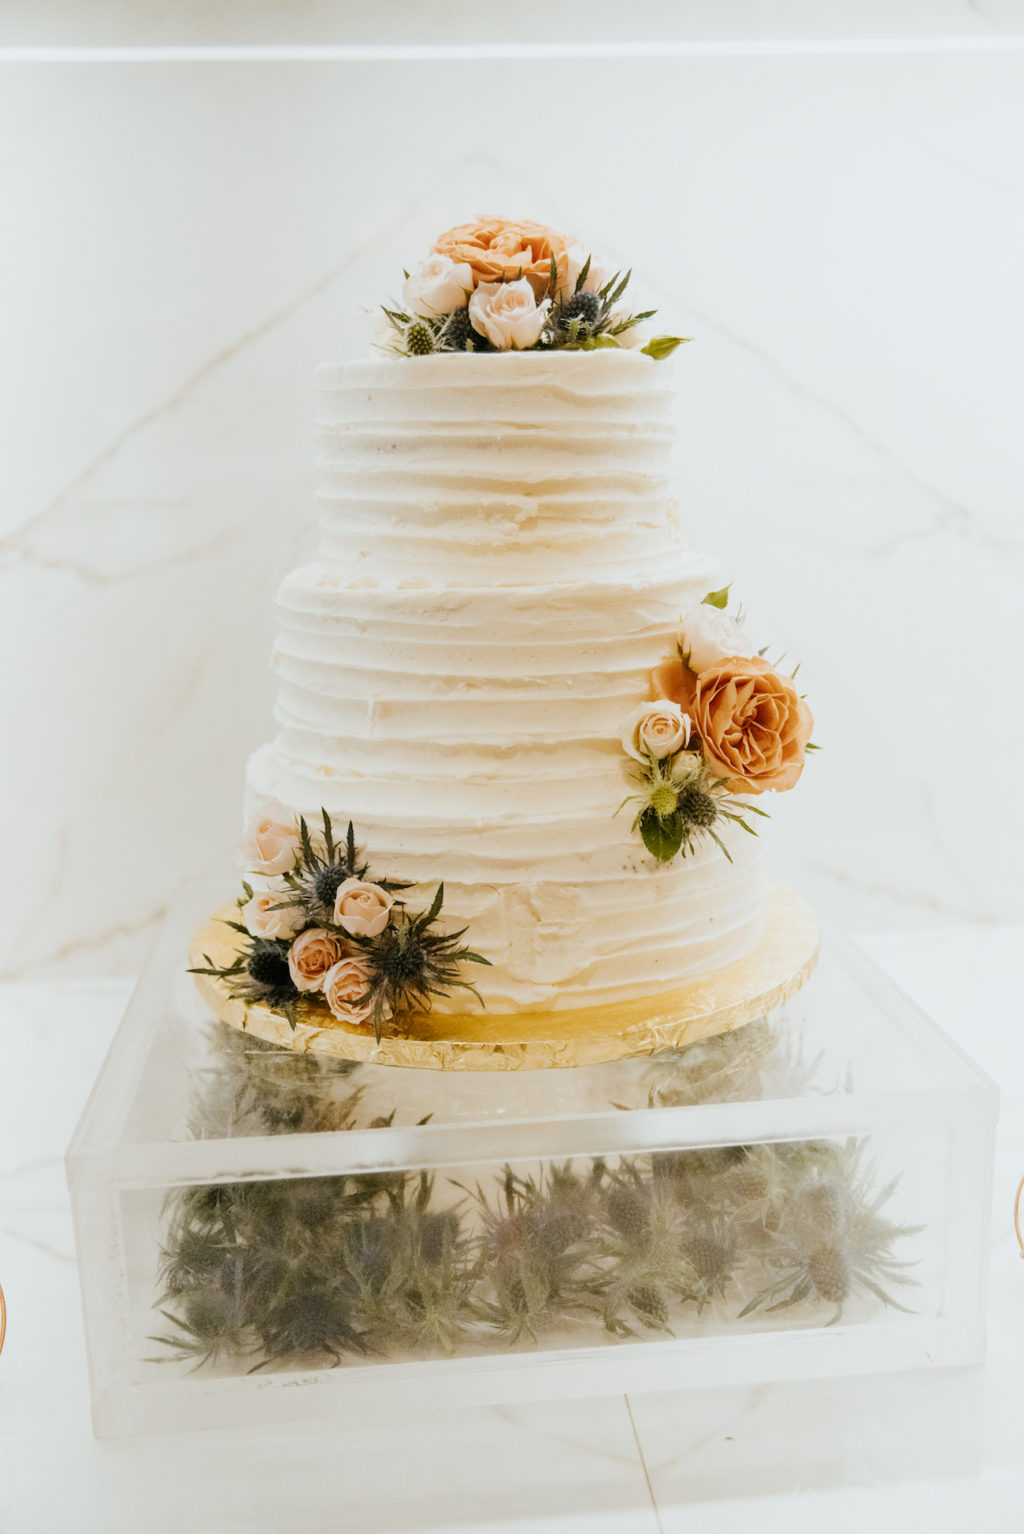 Three Tier Wedding Cake with Textured Ribbed Buttercream and Fresh Blush Pink Roses and Blue Thistle on Acrylic Clear Square Cake Stand filled with Blue Thistle